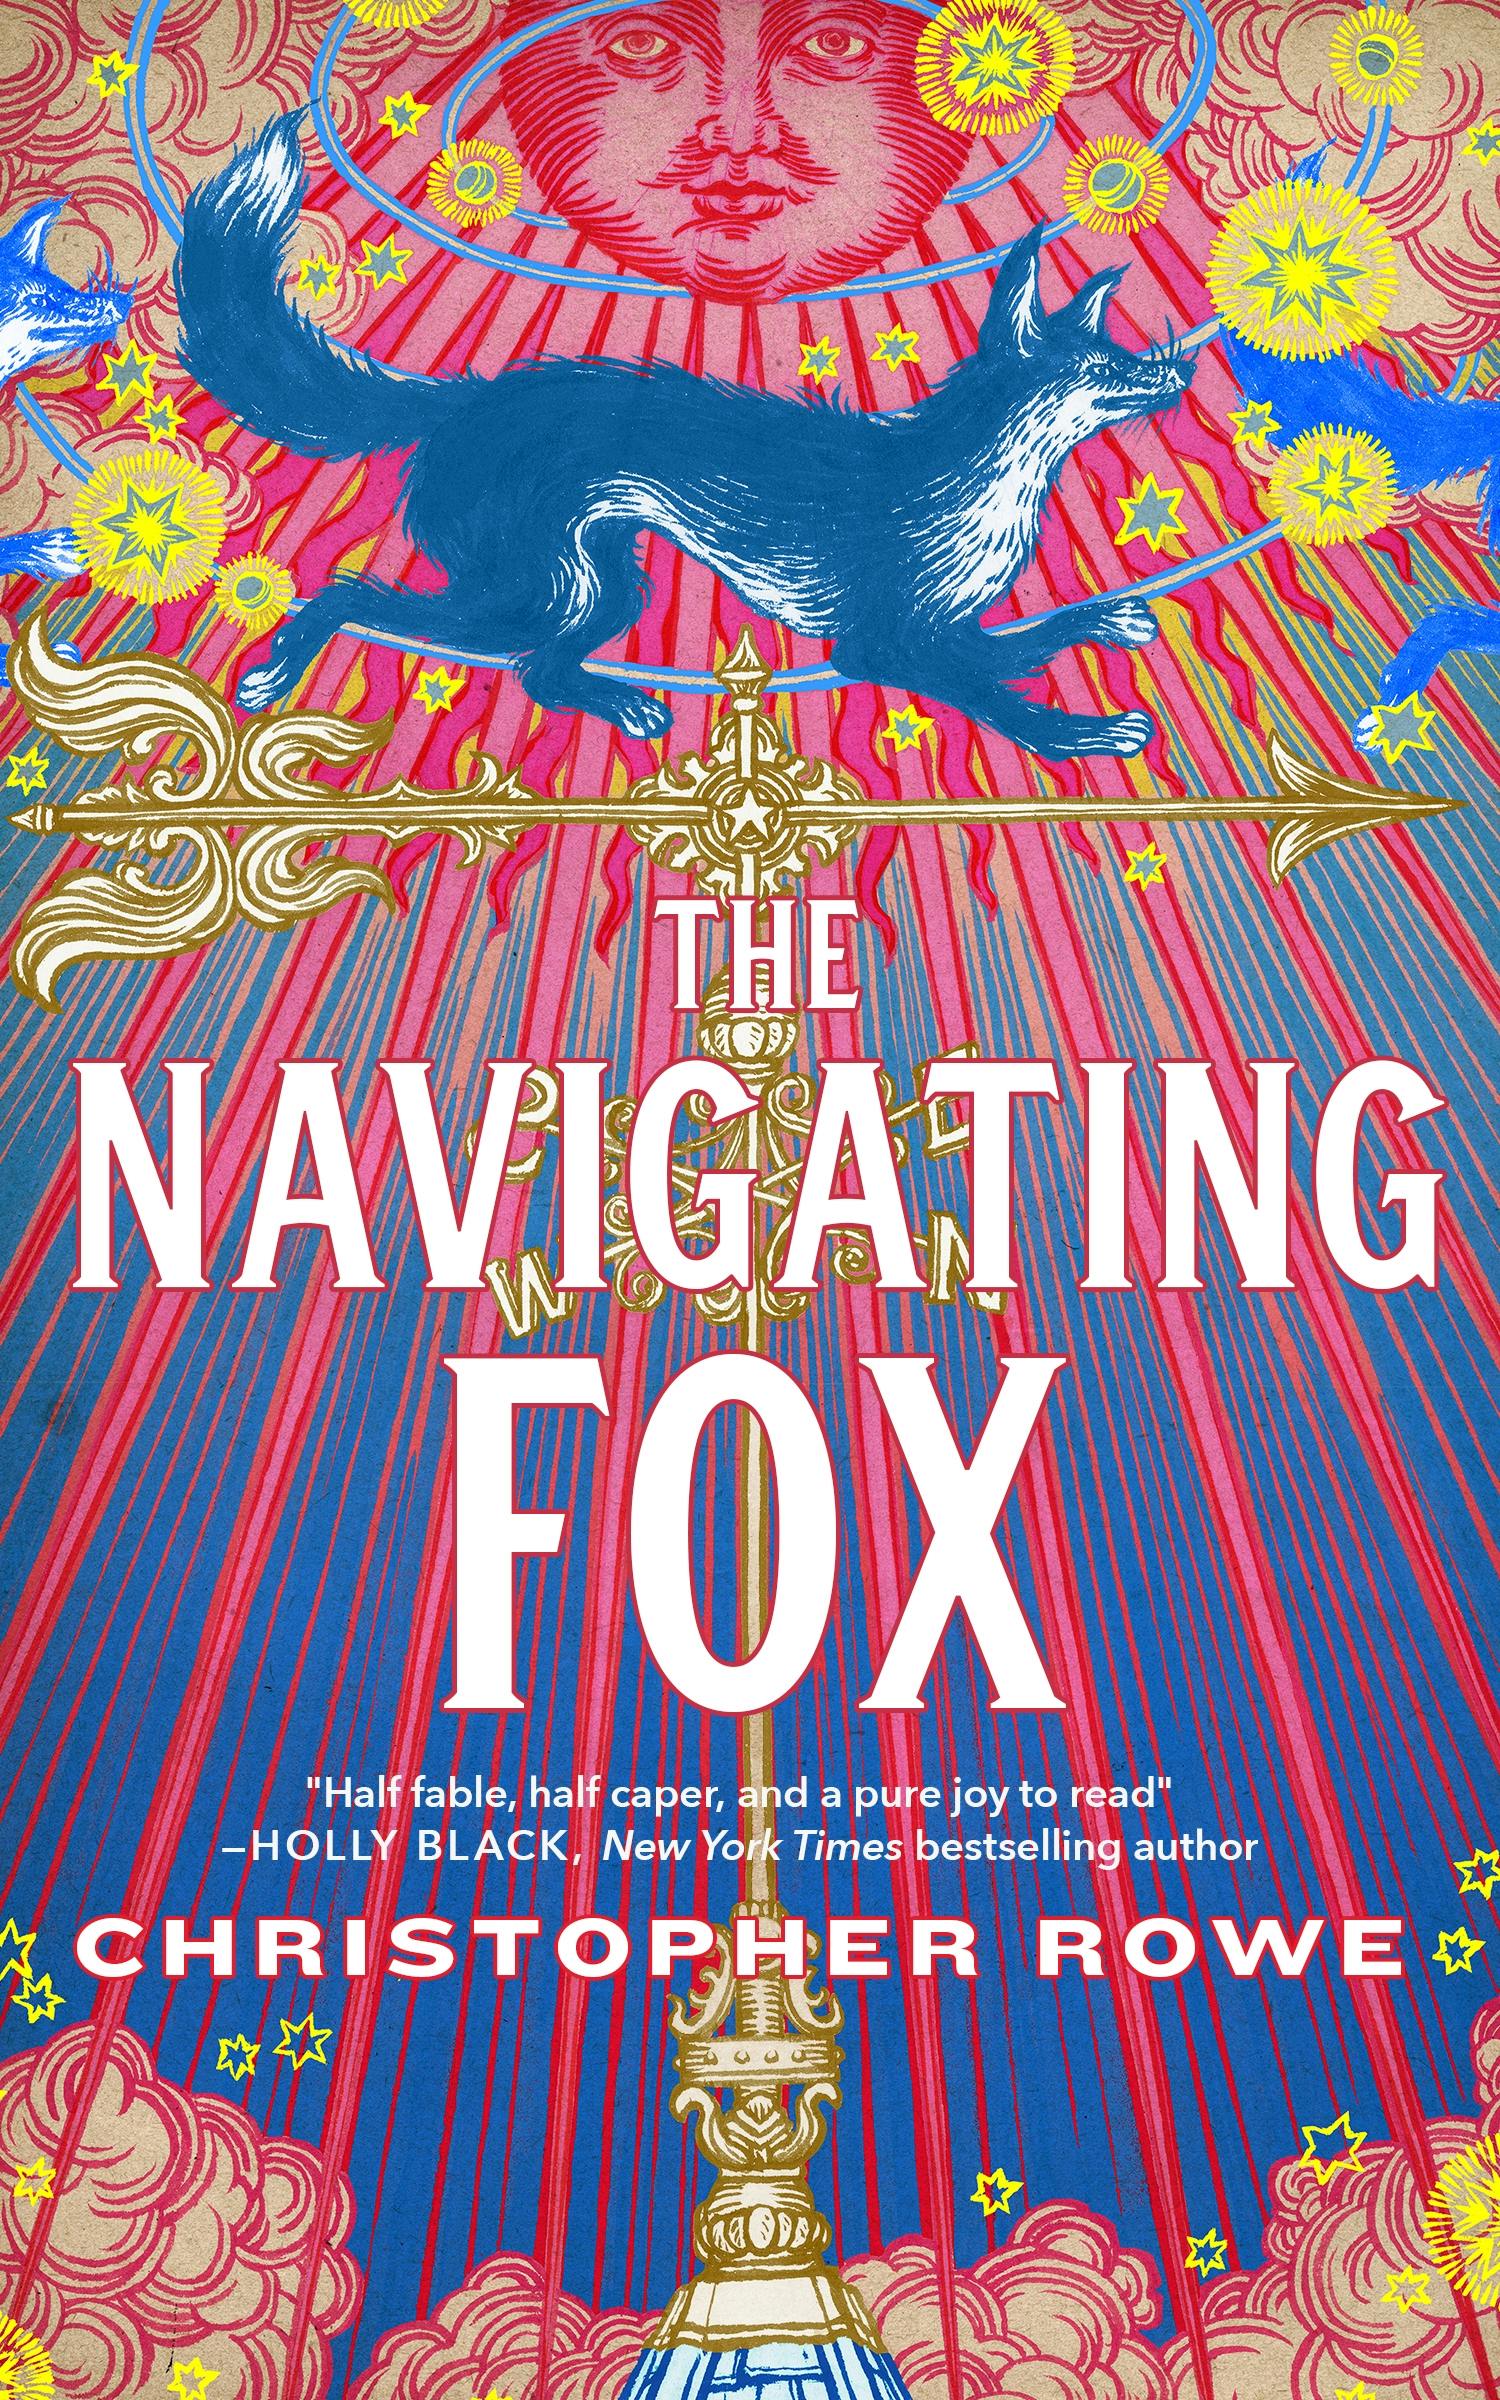 Cover for the book titled as: The Navigating Fox